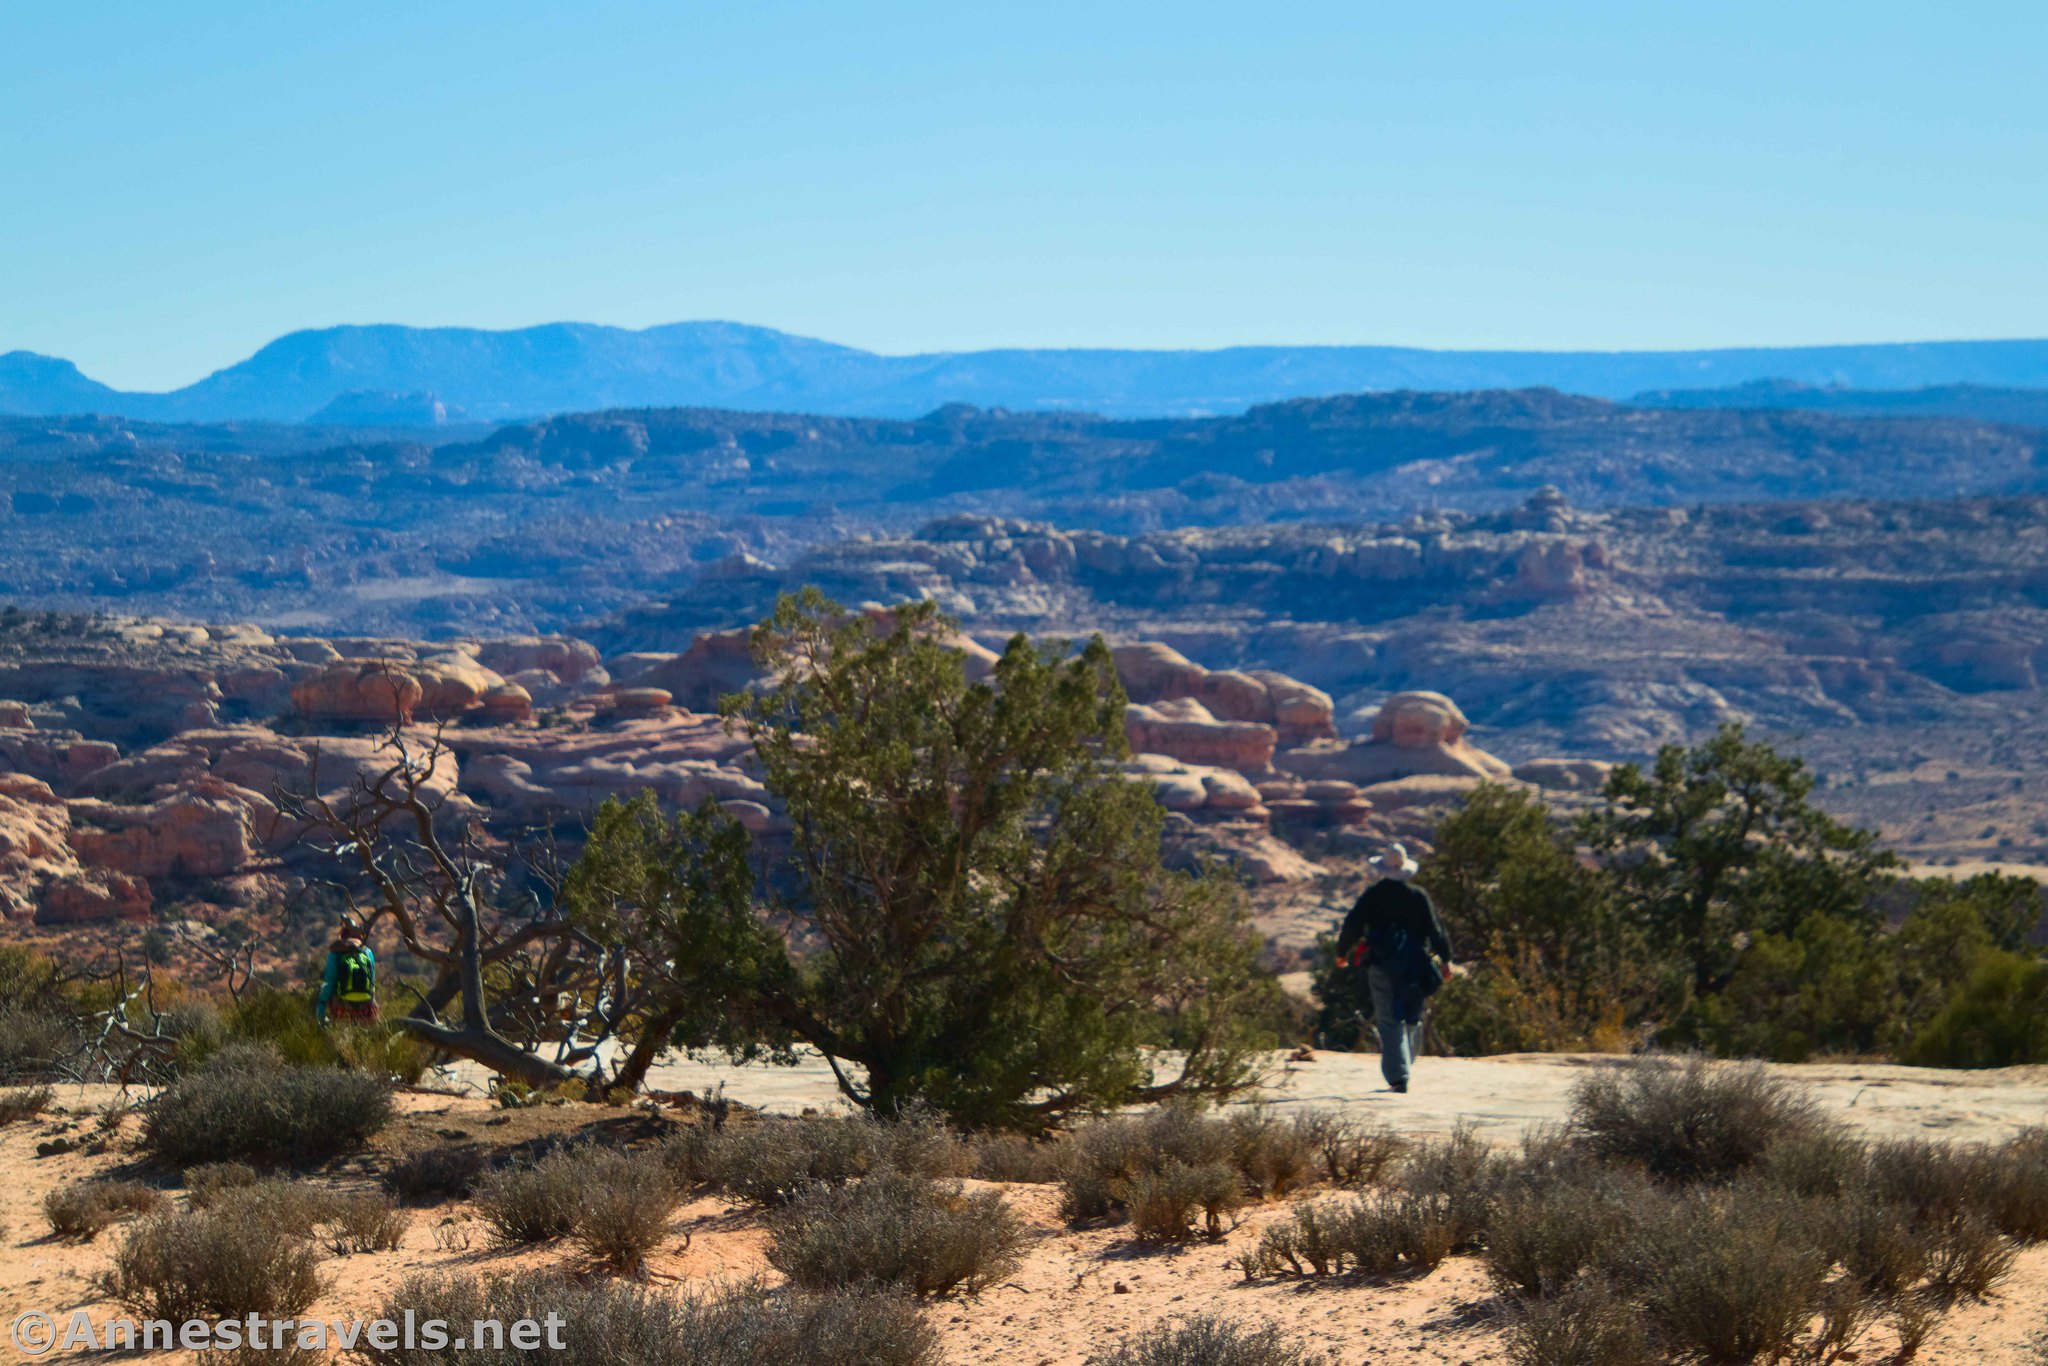 Hiking down the Fins Trail, Maze District of Canyonlands National Park, Utah